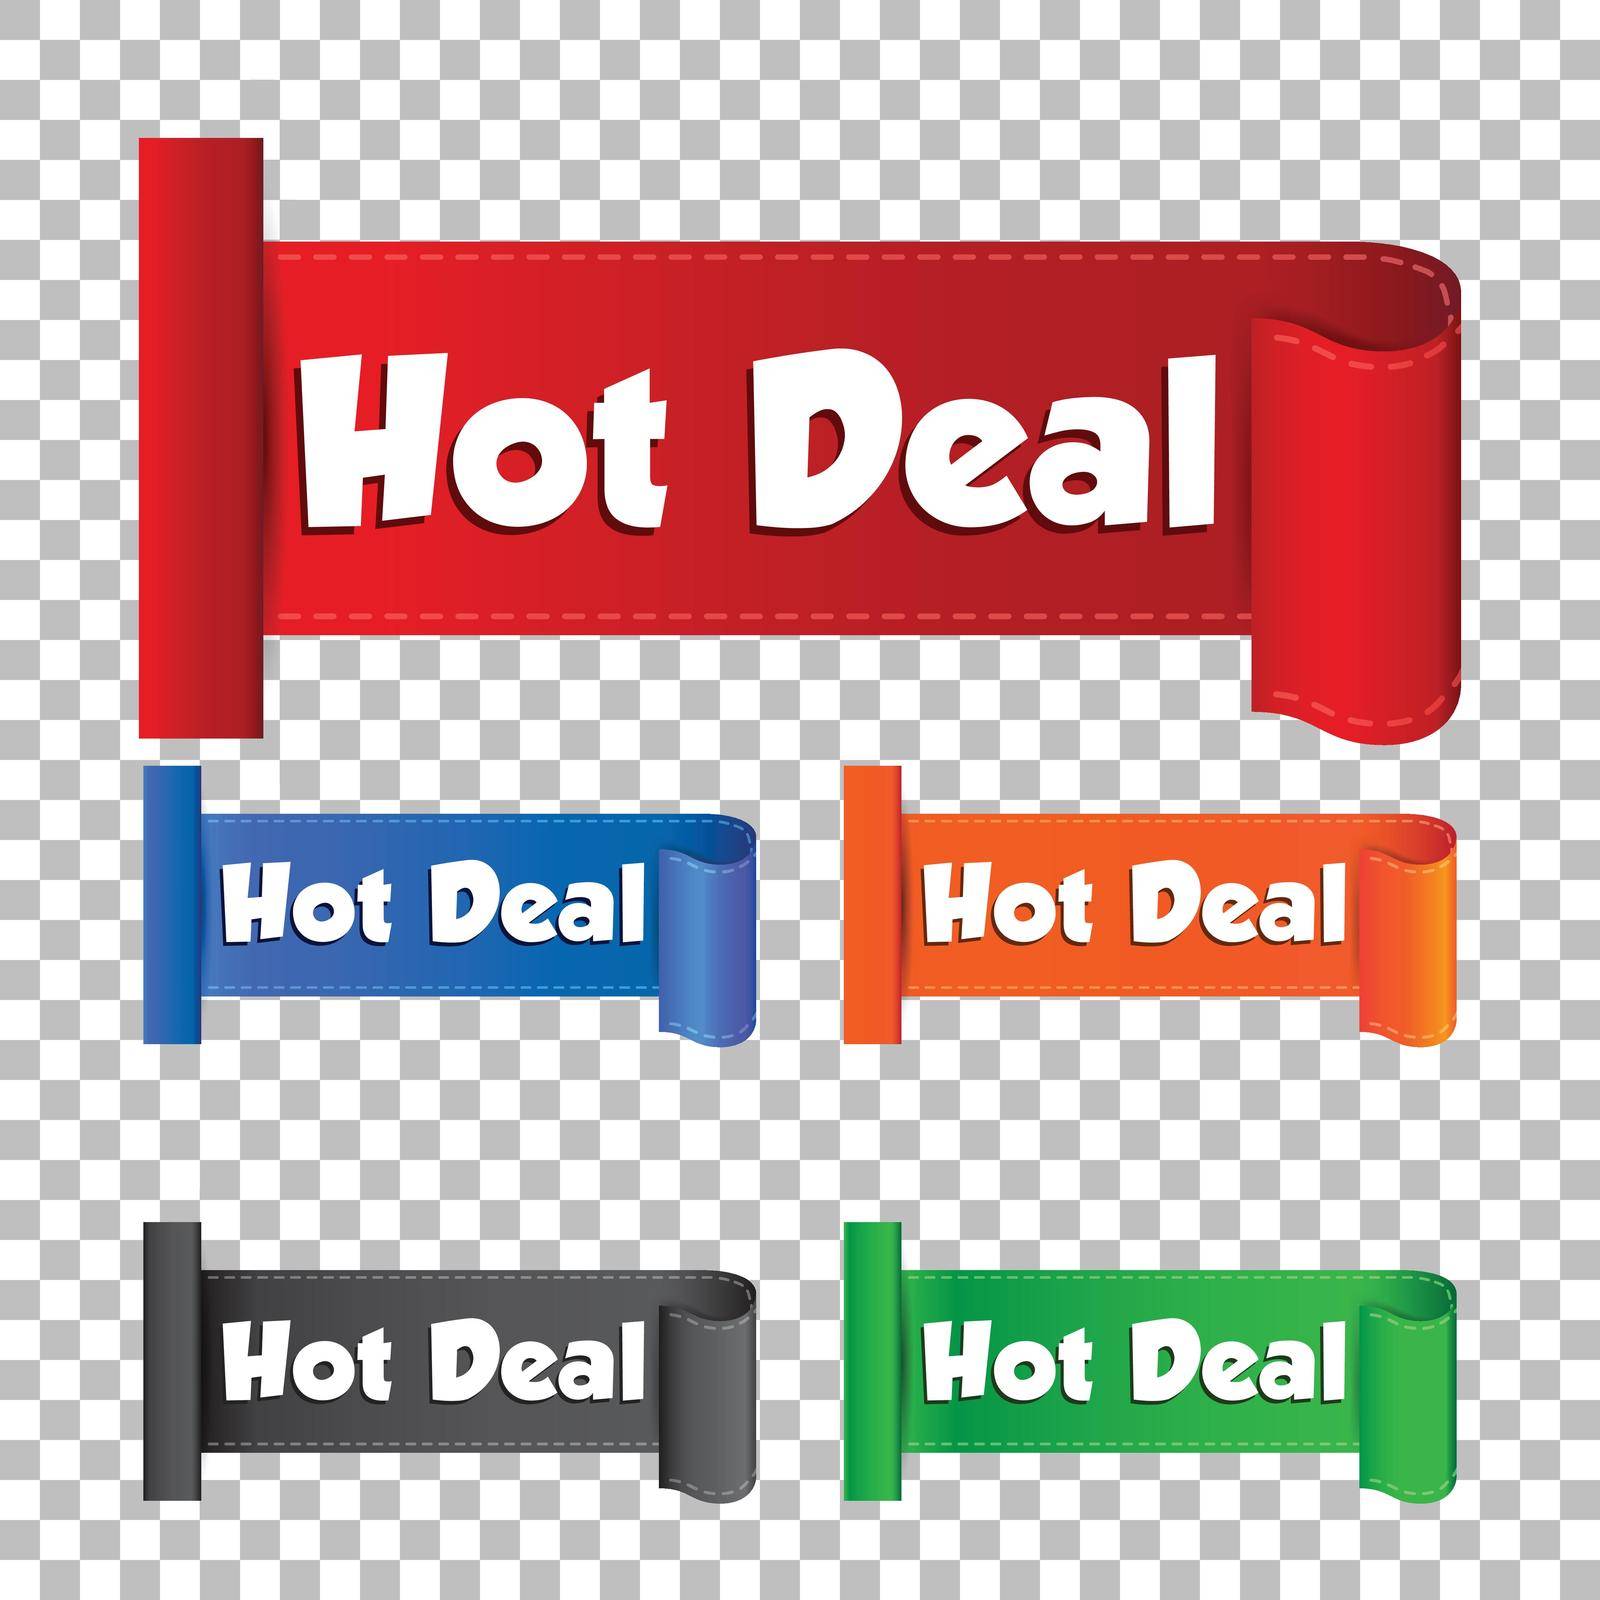 Hot deal sticker. Label vector illustration on isolated background